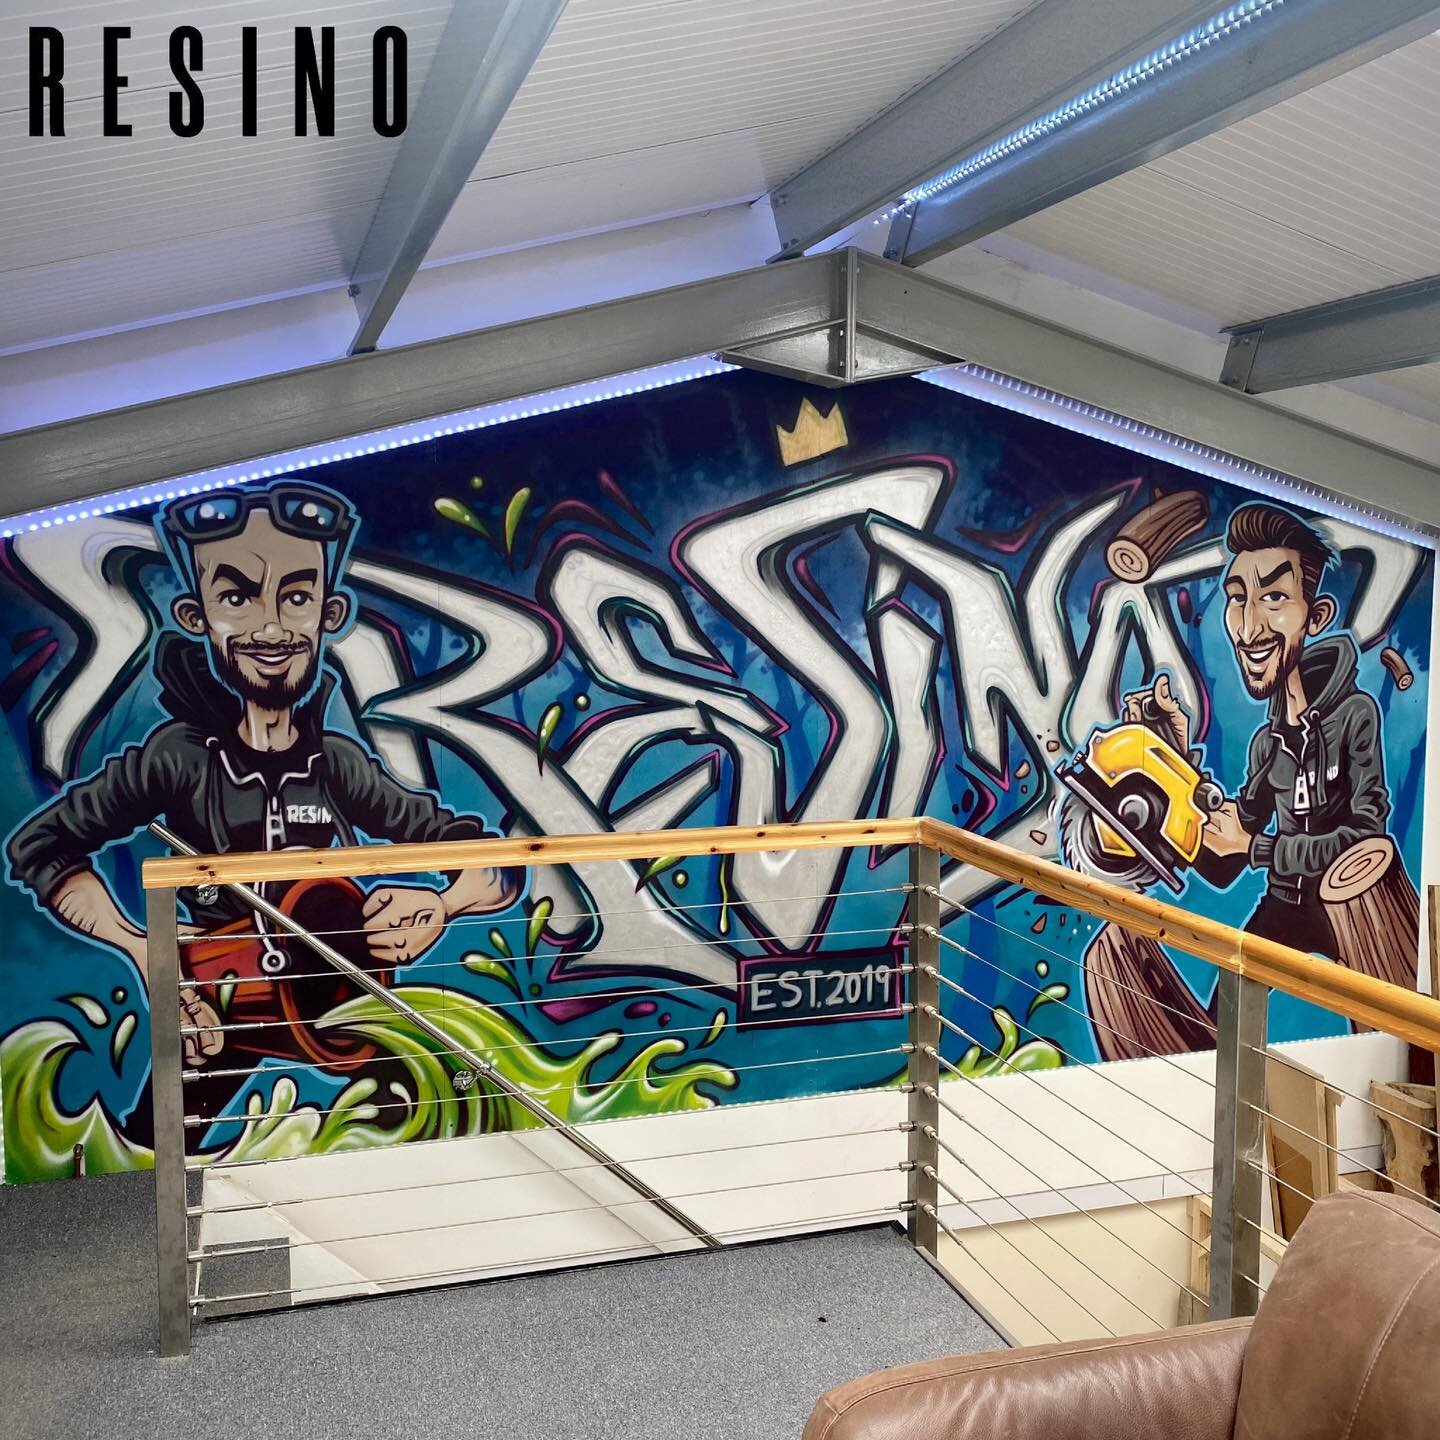 Finally put up our big wall art piece at Resino HQ! 
Certainly brightens up that end of the workshop. 
Thanks for the help SP:Zero!
.
.
.
#resino #resin #resinart #wallart #wallartdecor